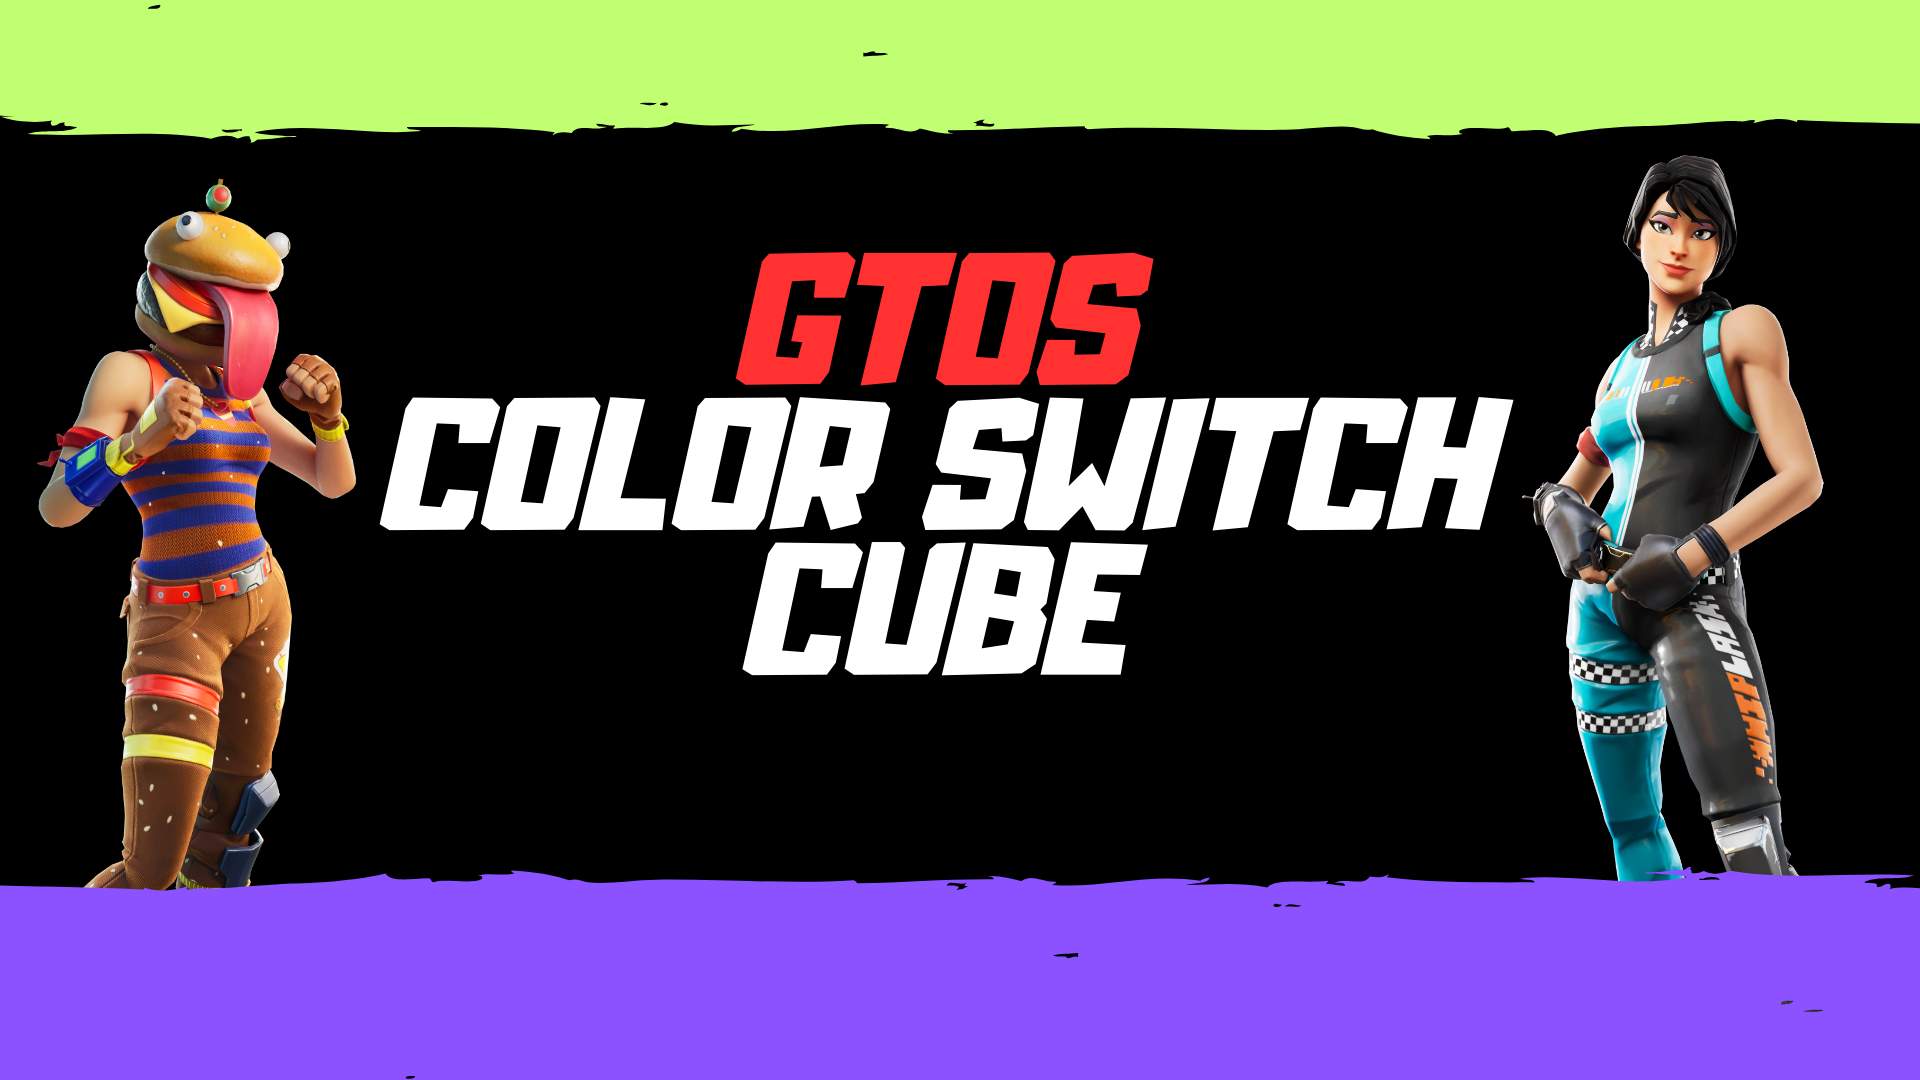 GTOS COLOR SWITCH CUBE